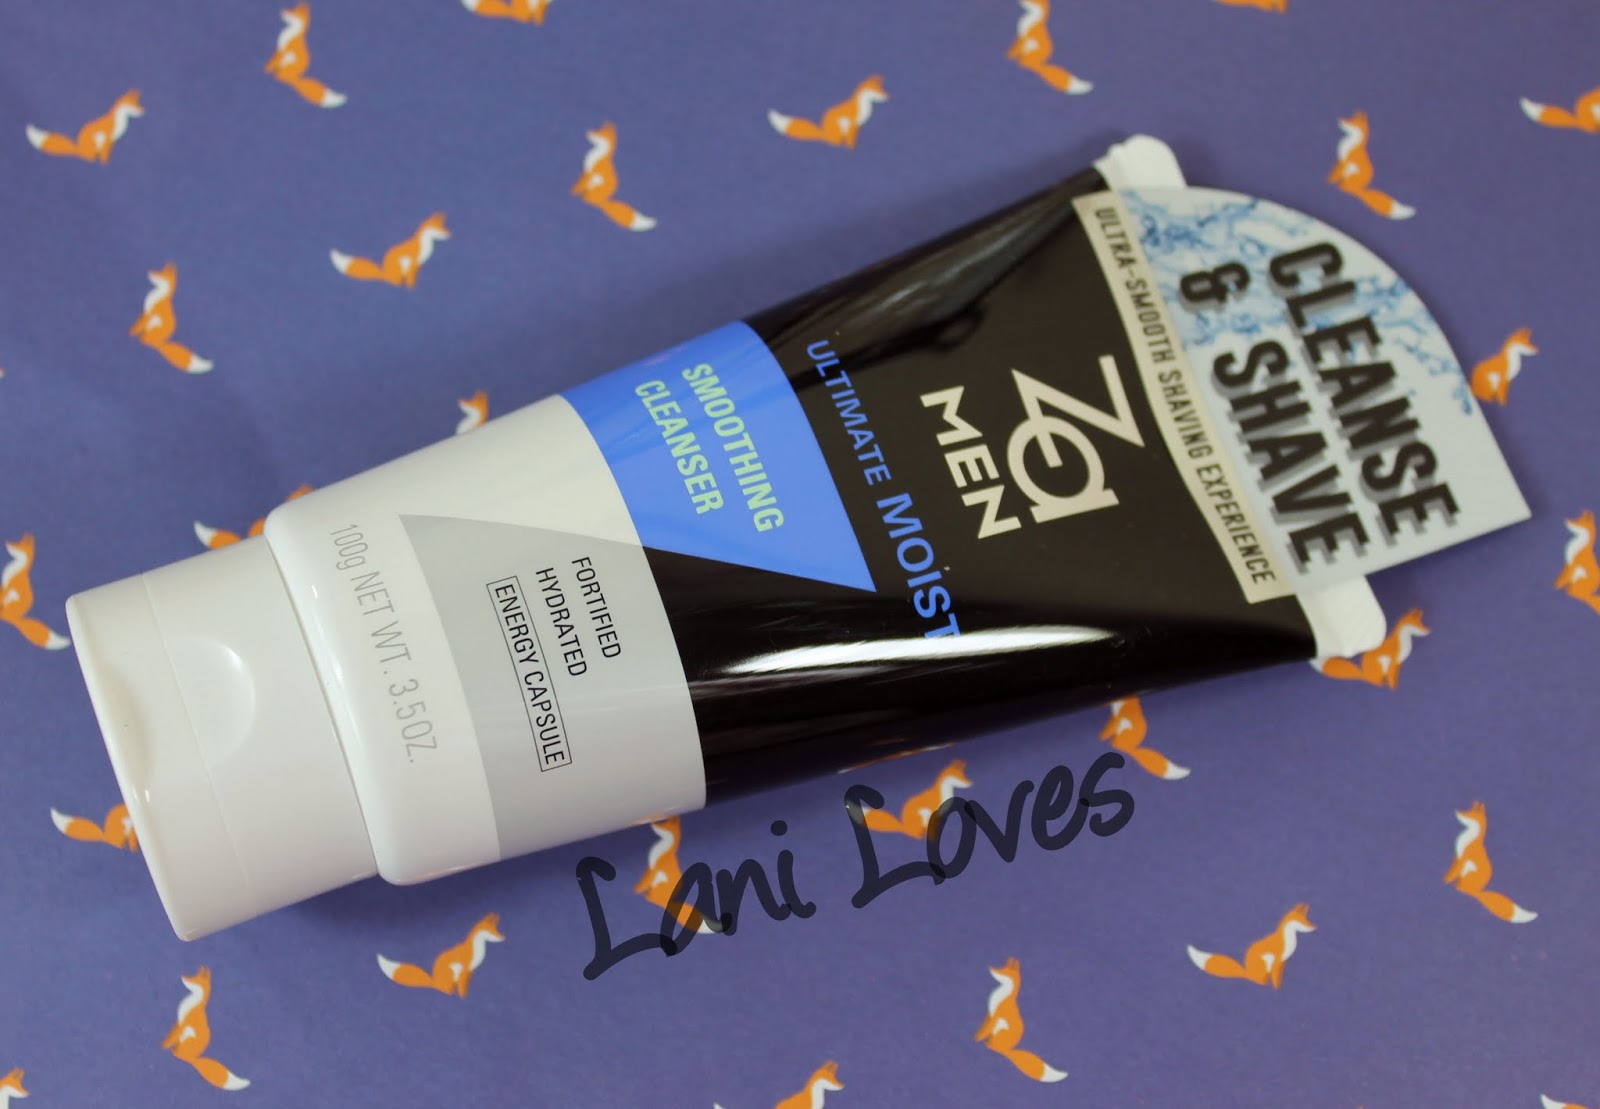 ZA Men Ultimate Moist Smoothing Cleanser and Hydrating Moisturizer review